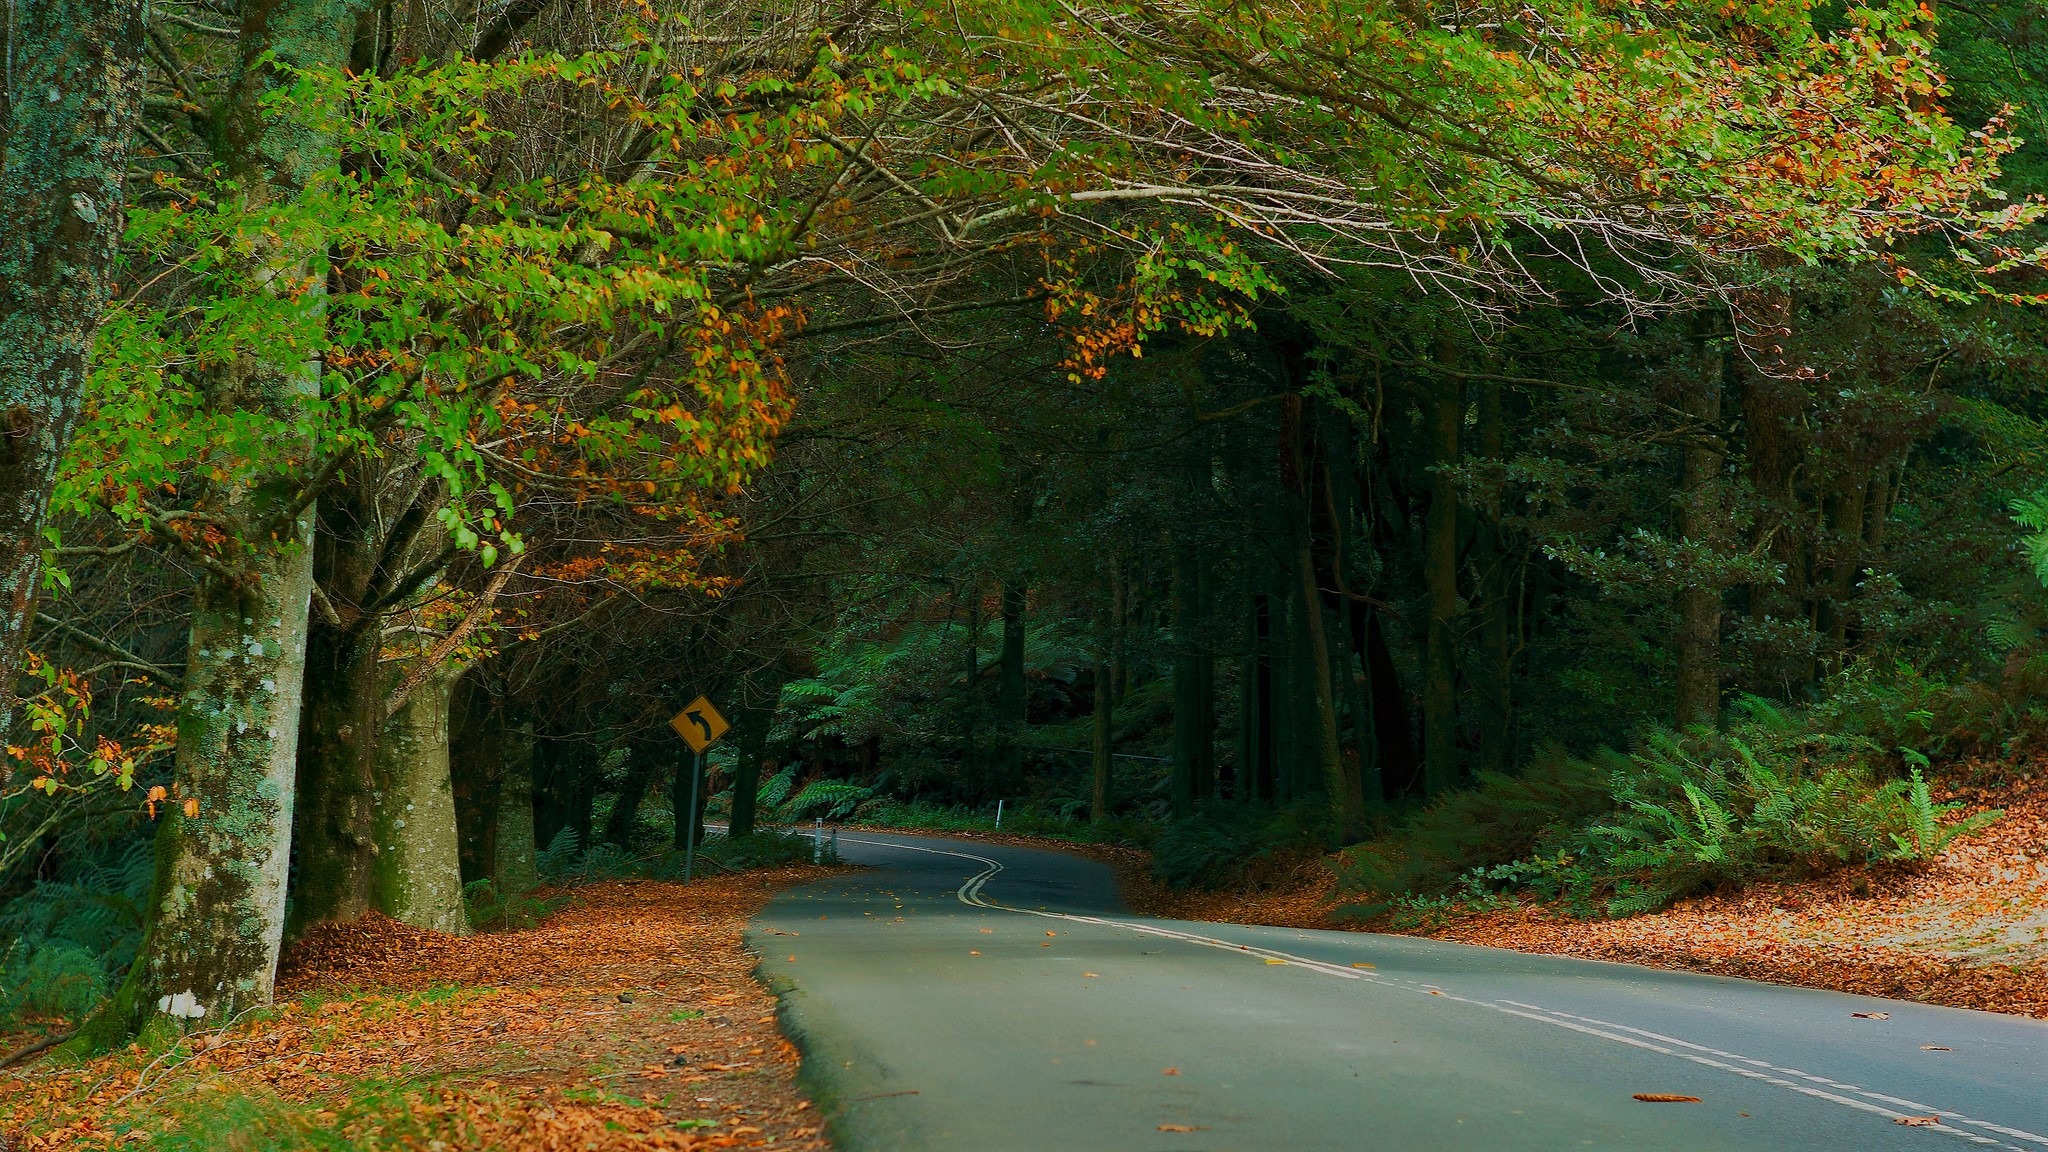 man made, road, canopy, fall, green images